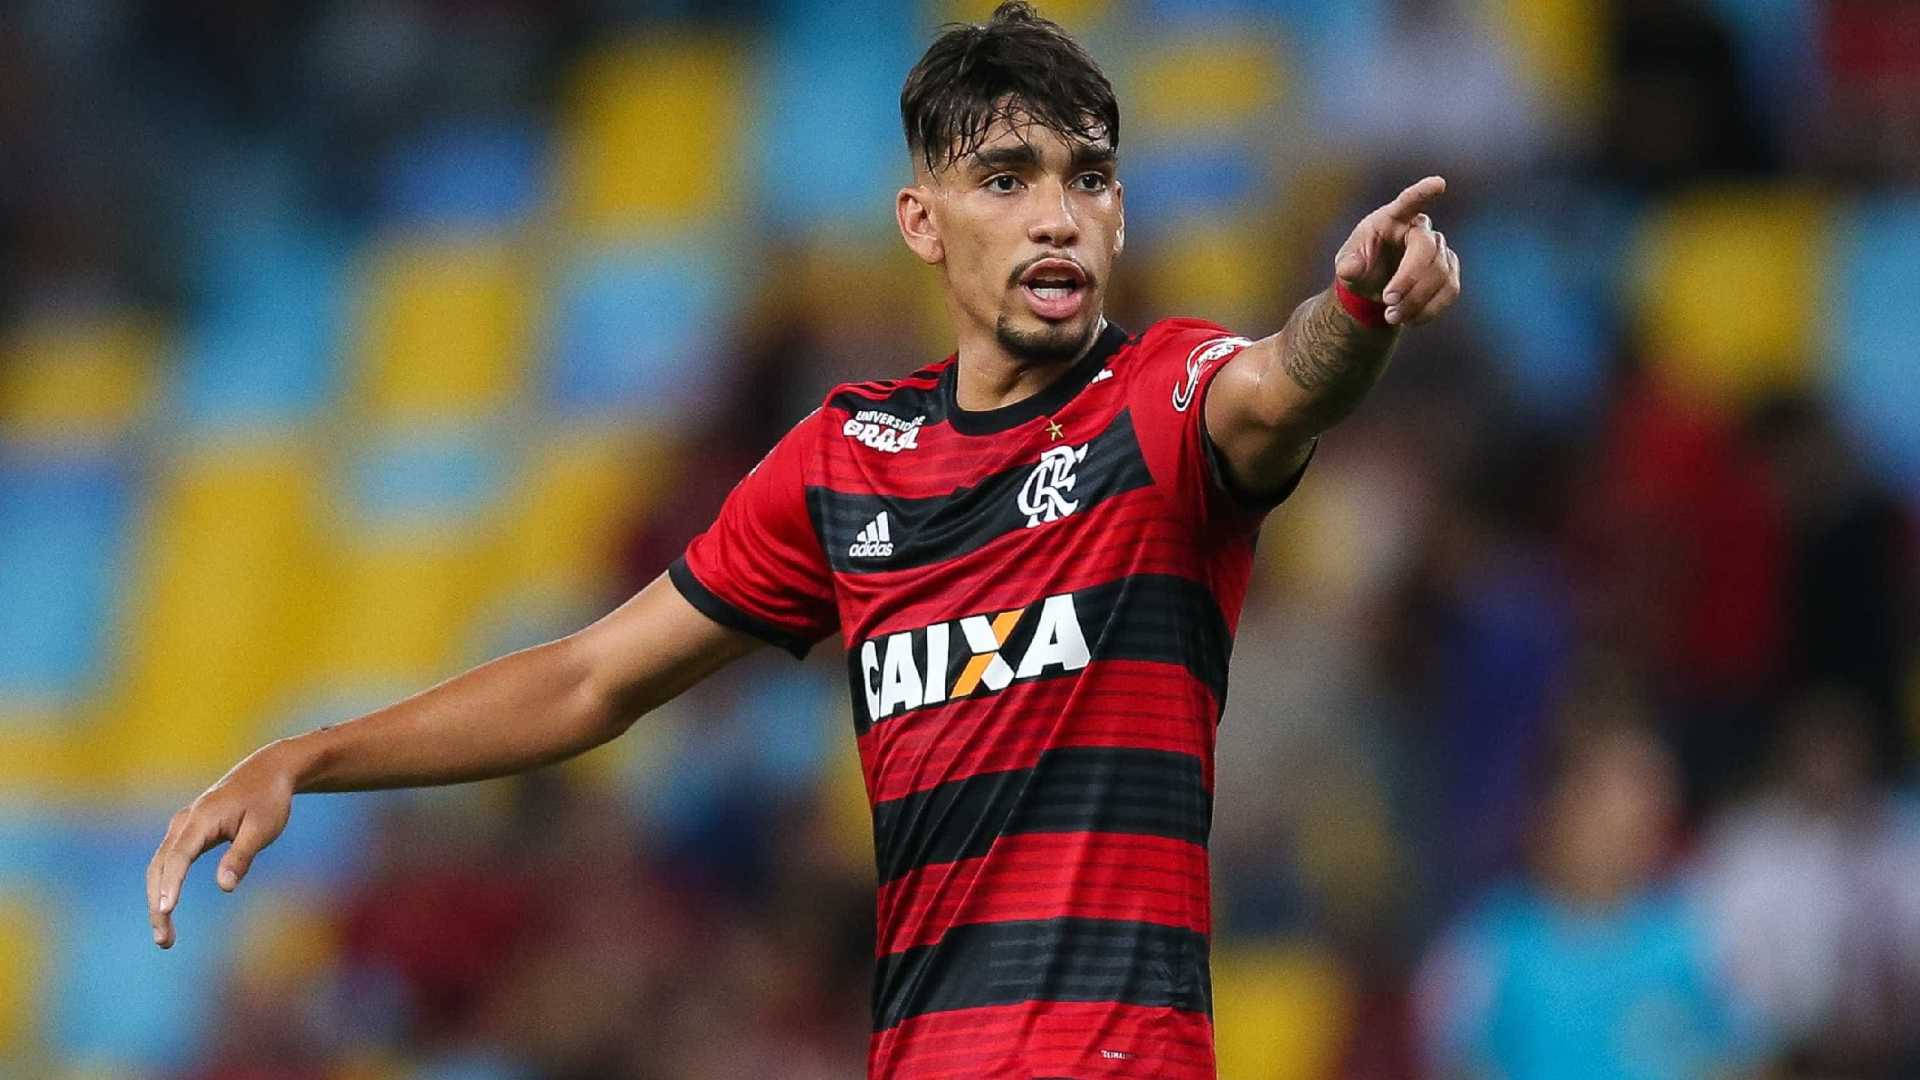 Lucas Paquetá Pointing During Game Wallpaper